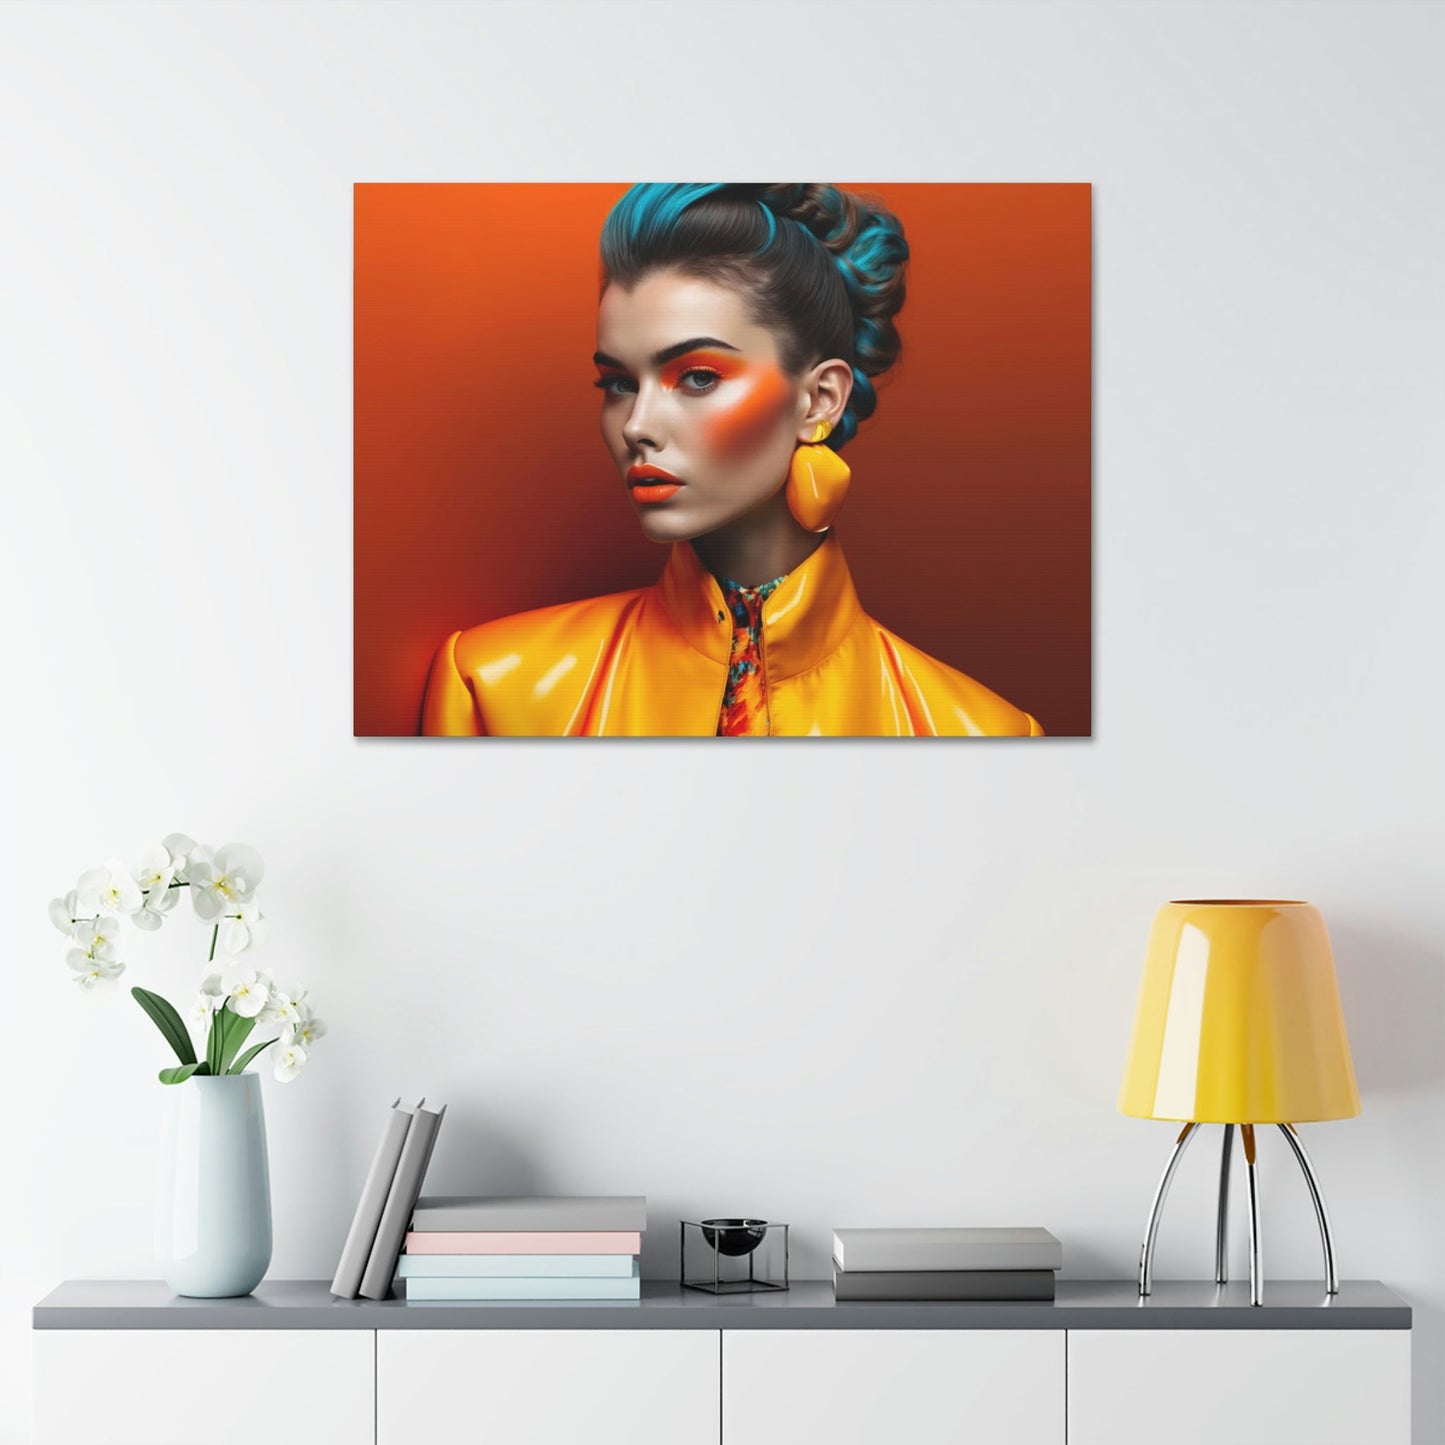 The Beauty of Style: A Poster of Fashion and Beauty for Your Wall